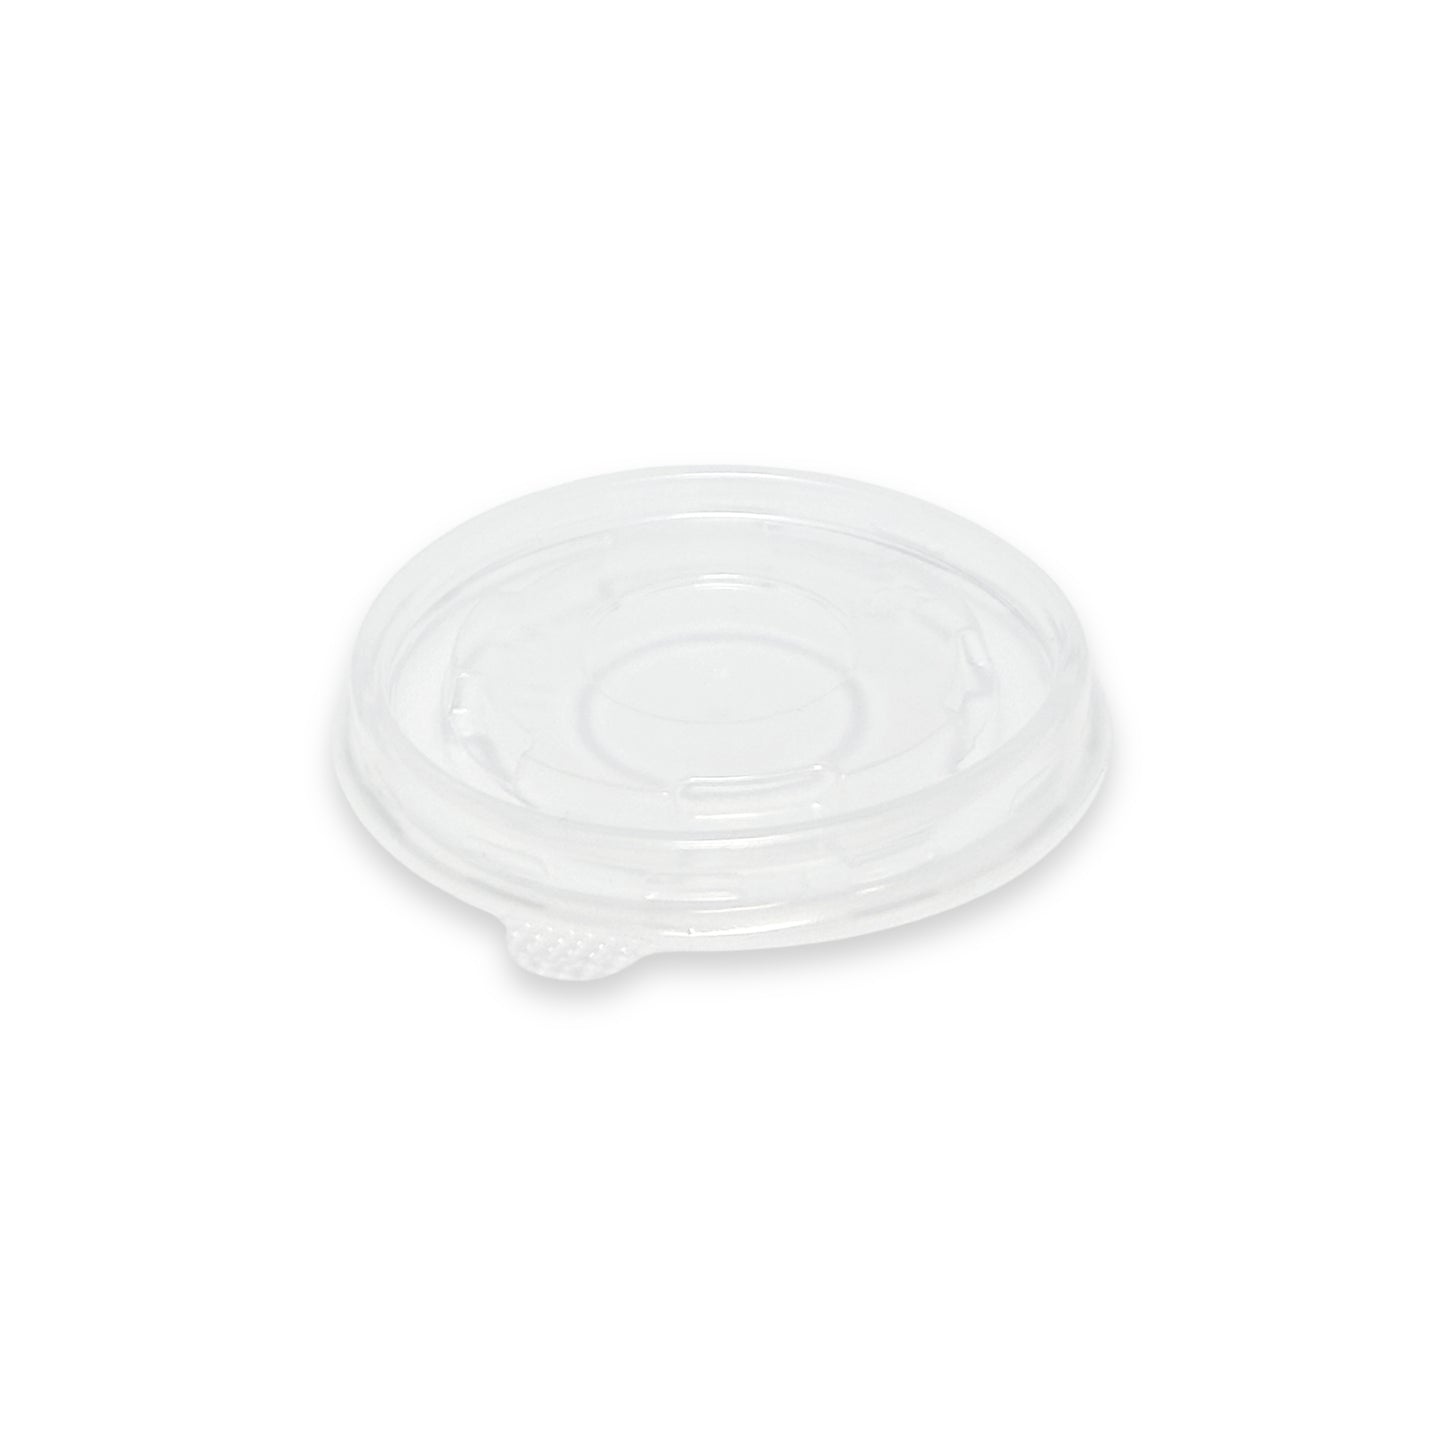 KIS-SL74G | 74mm PP Lid for 4oz Paper Soup Container; From $0.035/pc